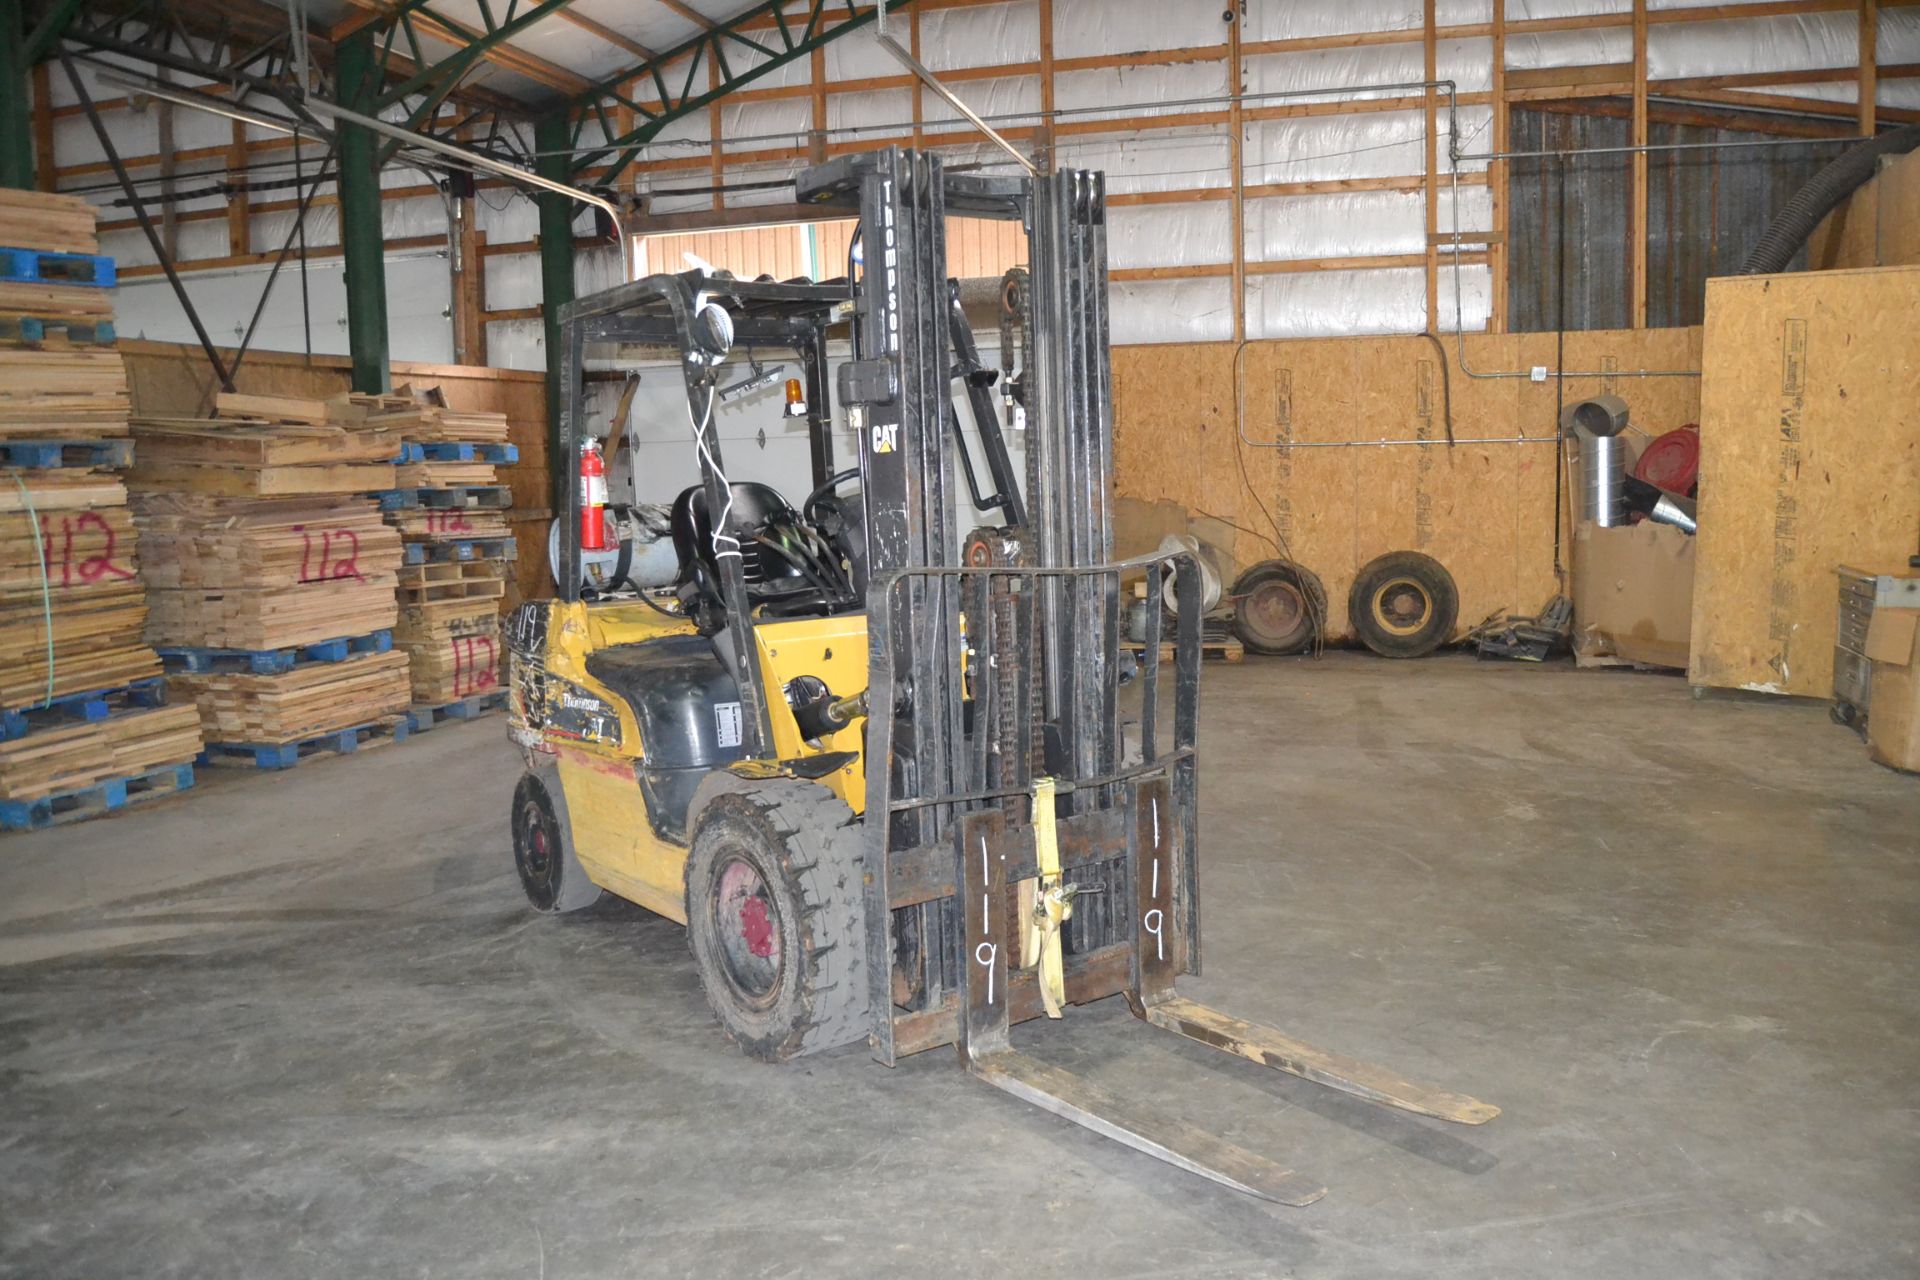 CAT MODEL 7000 FORKLIFT W/ PROPANE GAS ENGINE W/ SIDE SHIFT W/ 3 STAGE MASTSN#ST13F60171 9,574 HRS - Image 2 of 3